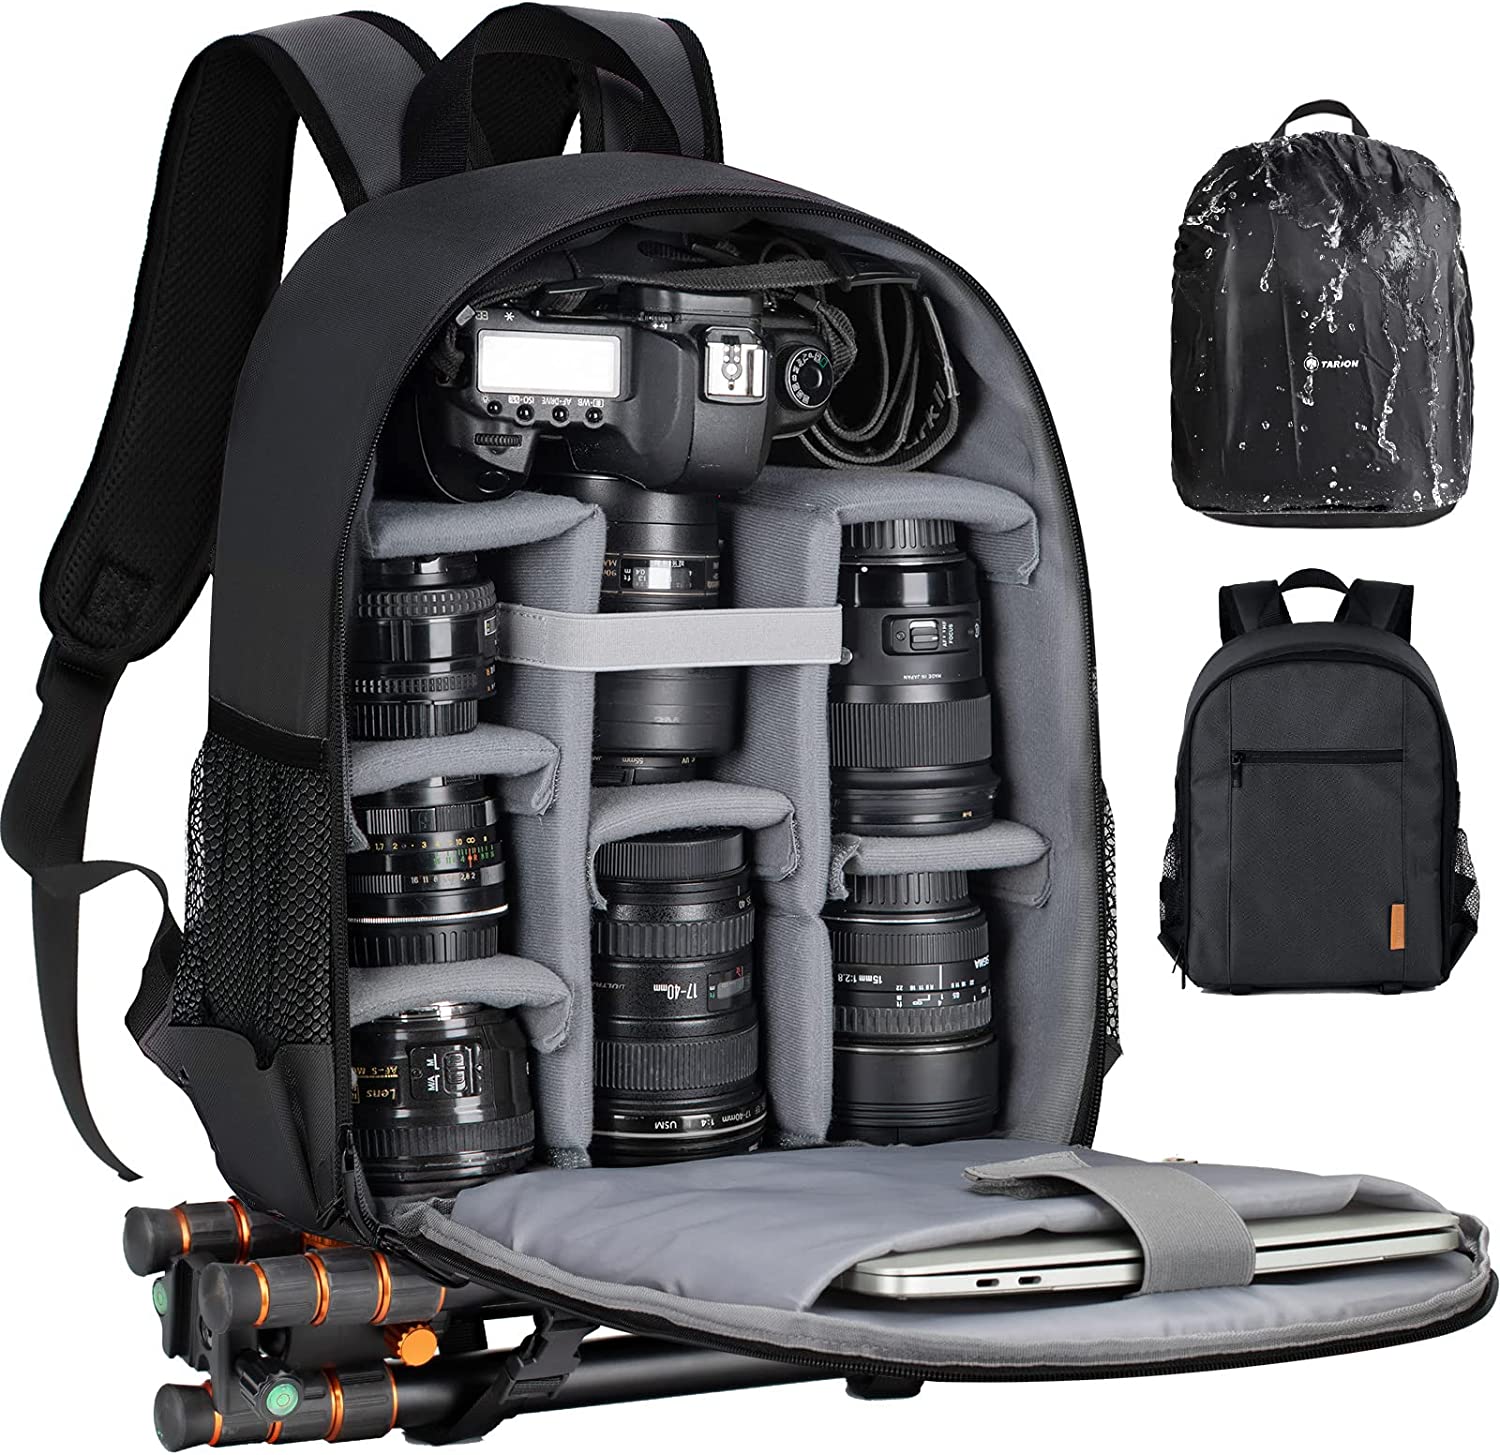 TARION Camera Bag Professional Camera Backpack with [...]